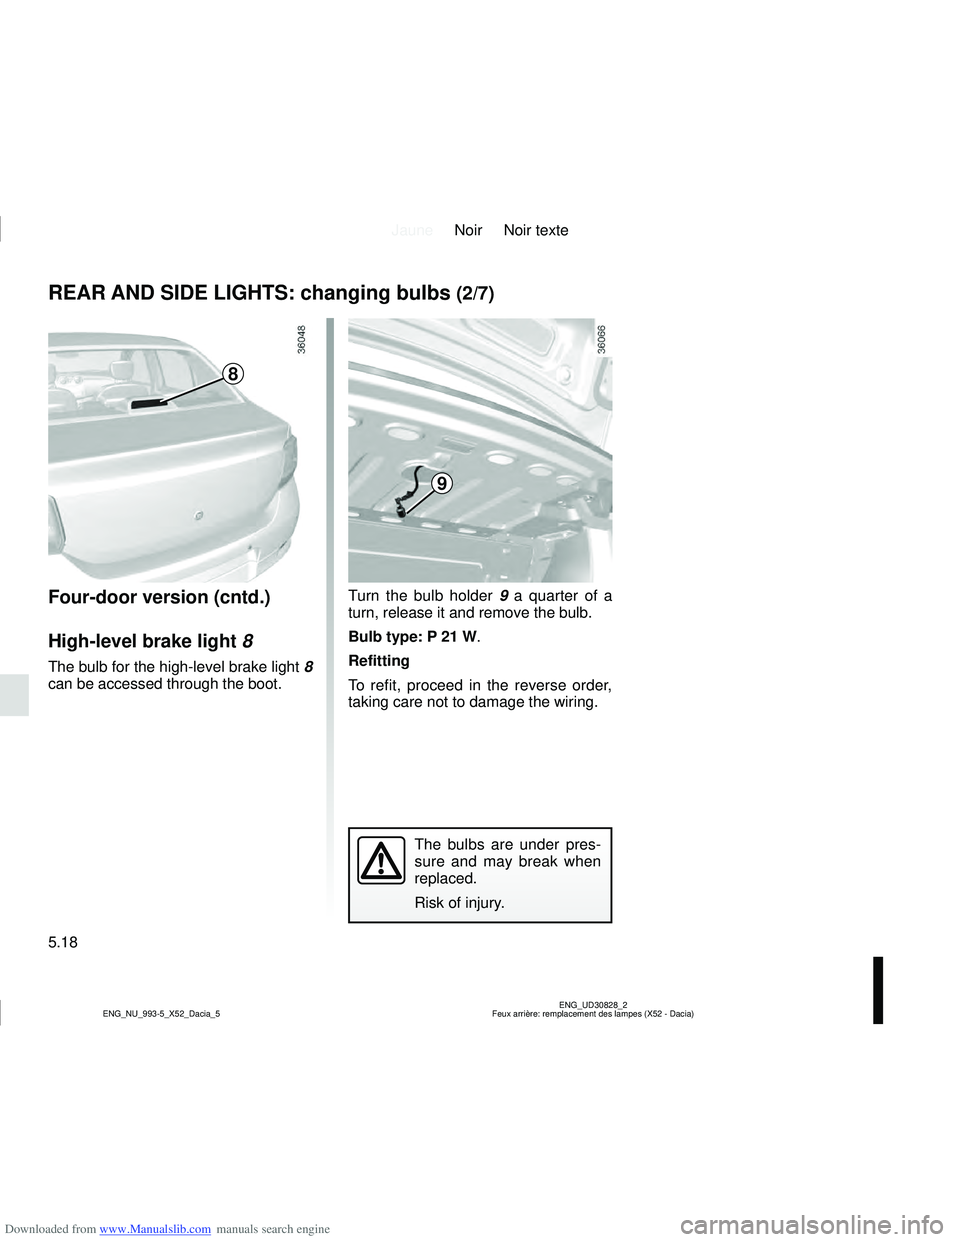 DACIA SANDERO 2011  Owners Manual Downloaded from www.Manualslib.com manuals search engine JauneNoir Noir texte
5.18
ENG_UD30828_2
Feux arrière: remplacement des lampes (X52 - Dacia)
ENG_NU_993-5_X52_Dacia_5
REAR AND SIDE LIGHTS: cha